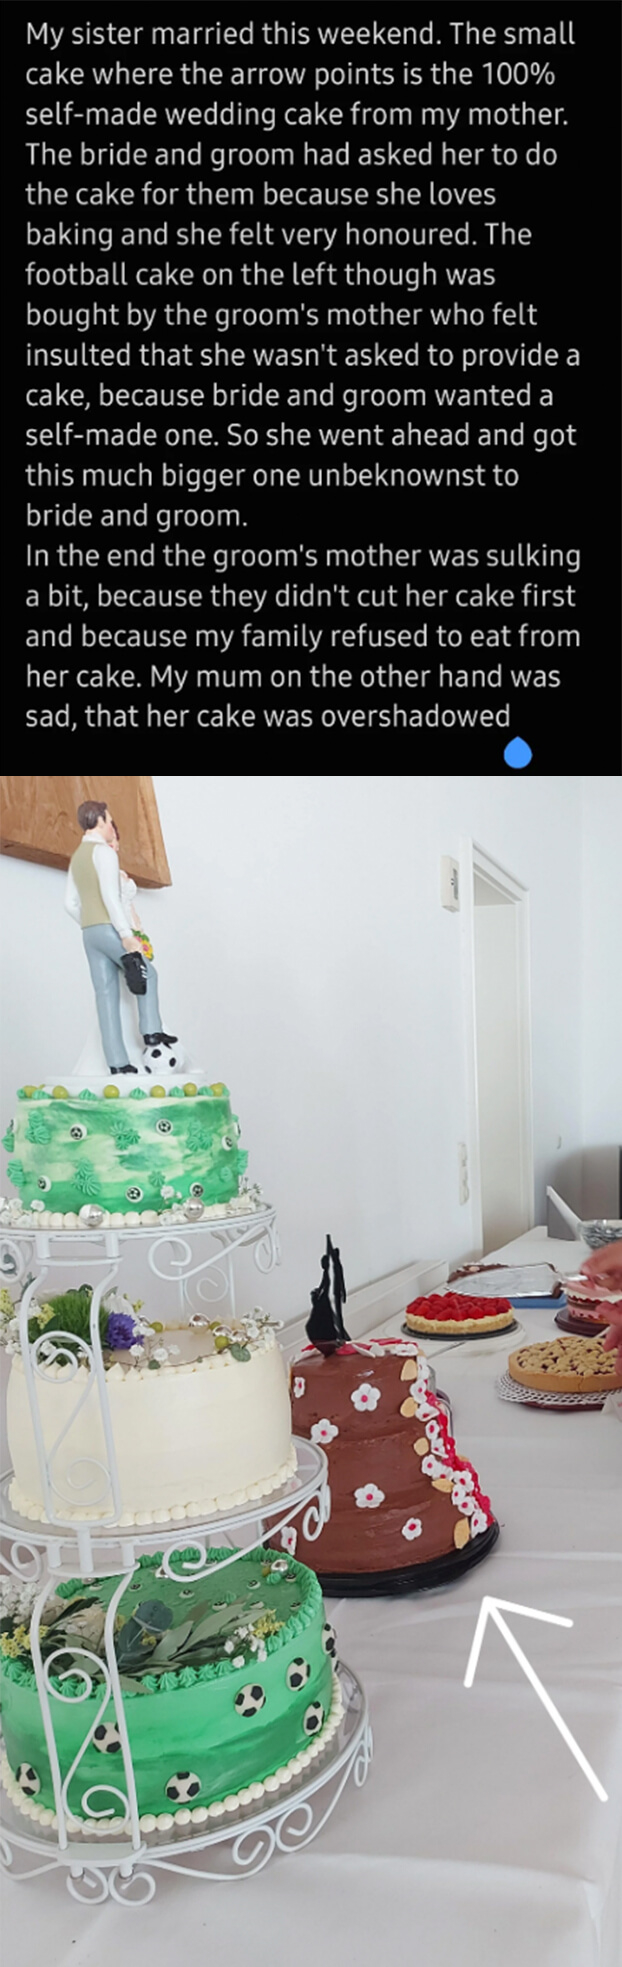 The couple asked the bride&#x27;s mother to make a cake for their wedding because she&#x27;s a baker, and the groom&#x27;s mother responded by buying a giant cake to overshadow the homemade one